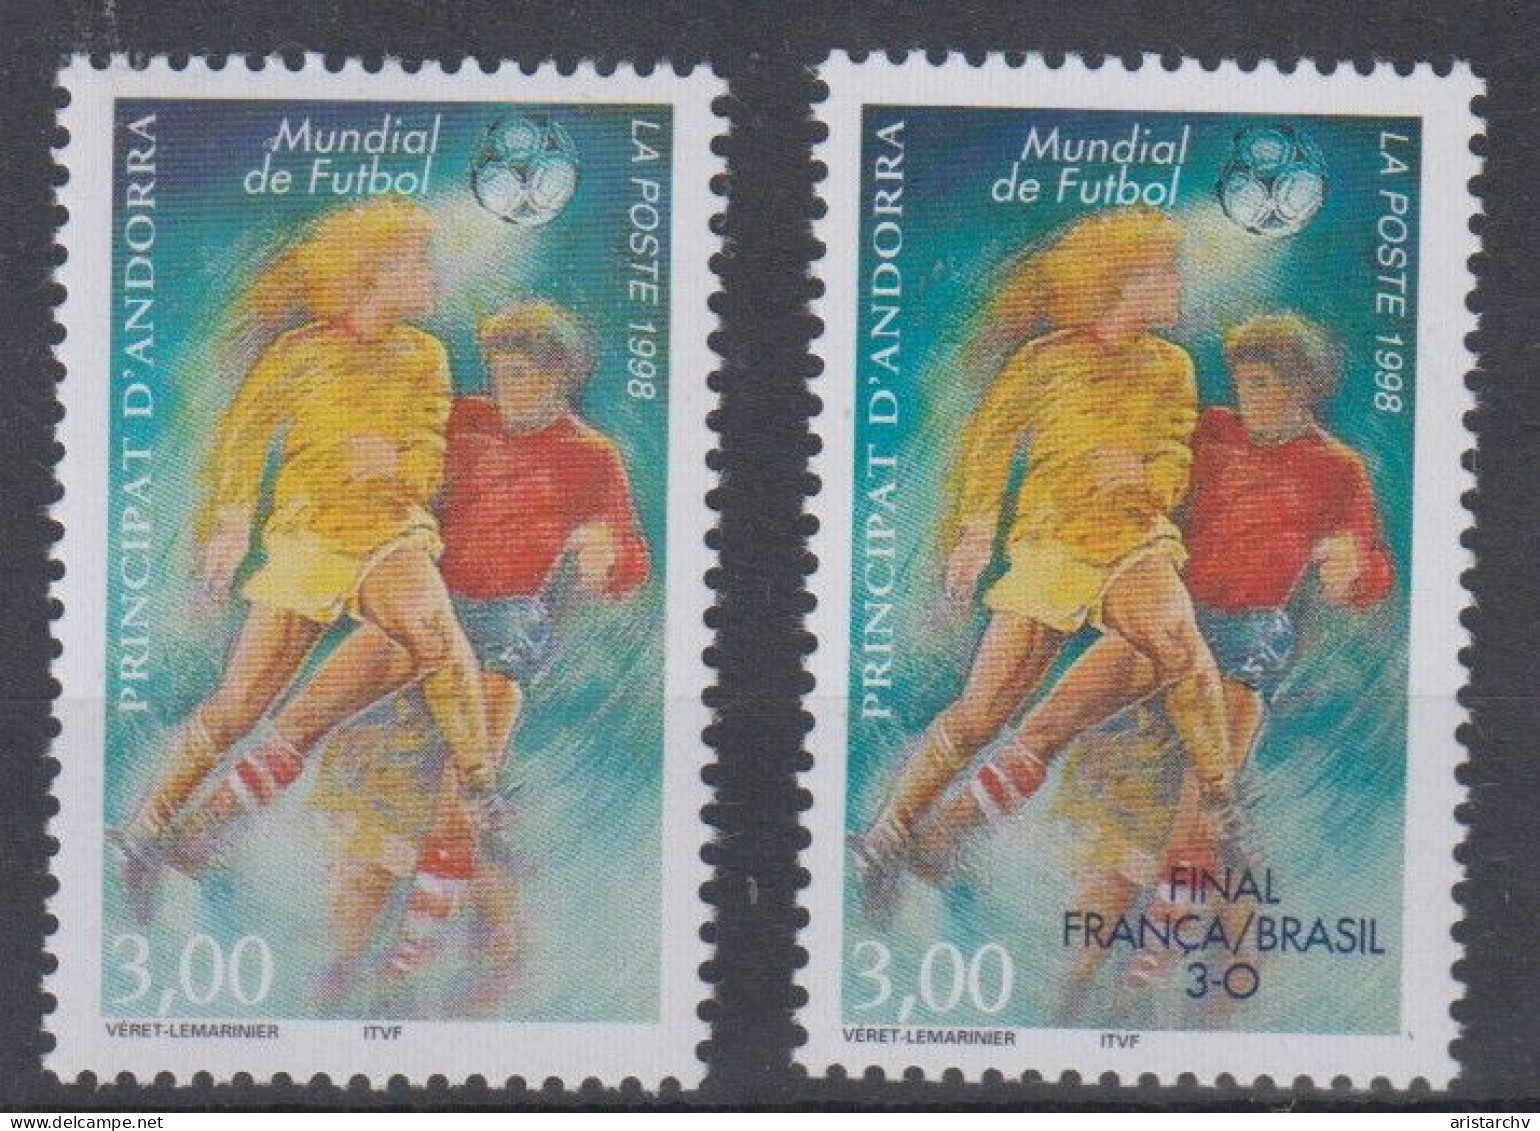 ANDORRA 1998 FOOTBALL WORLD CUP 2 STAMPS 1 OVERPRINT - 1998 – France